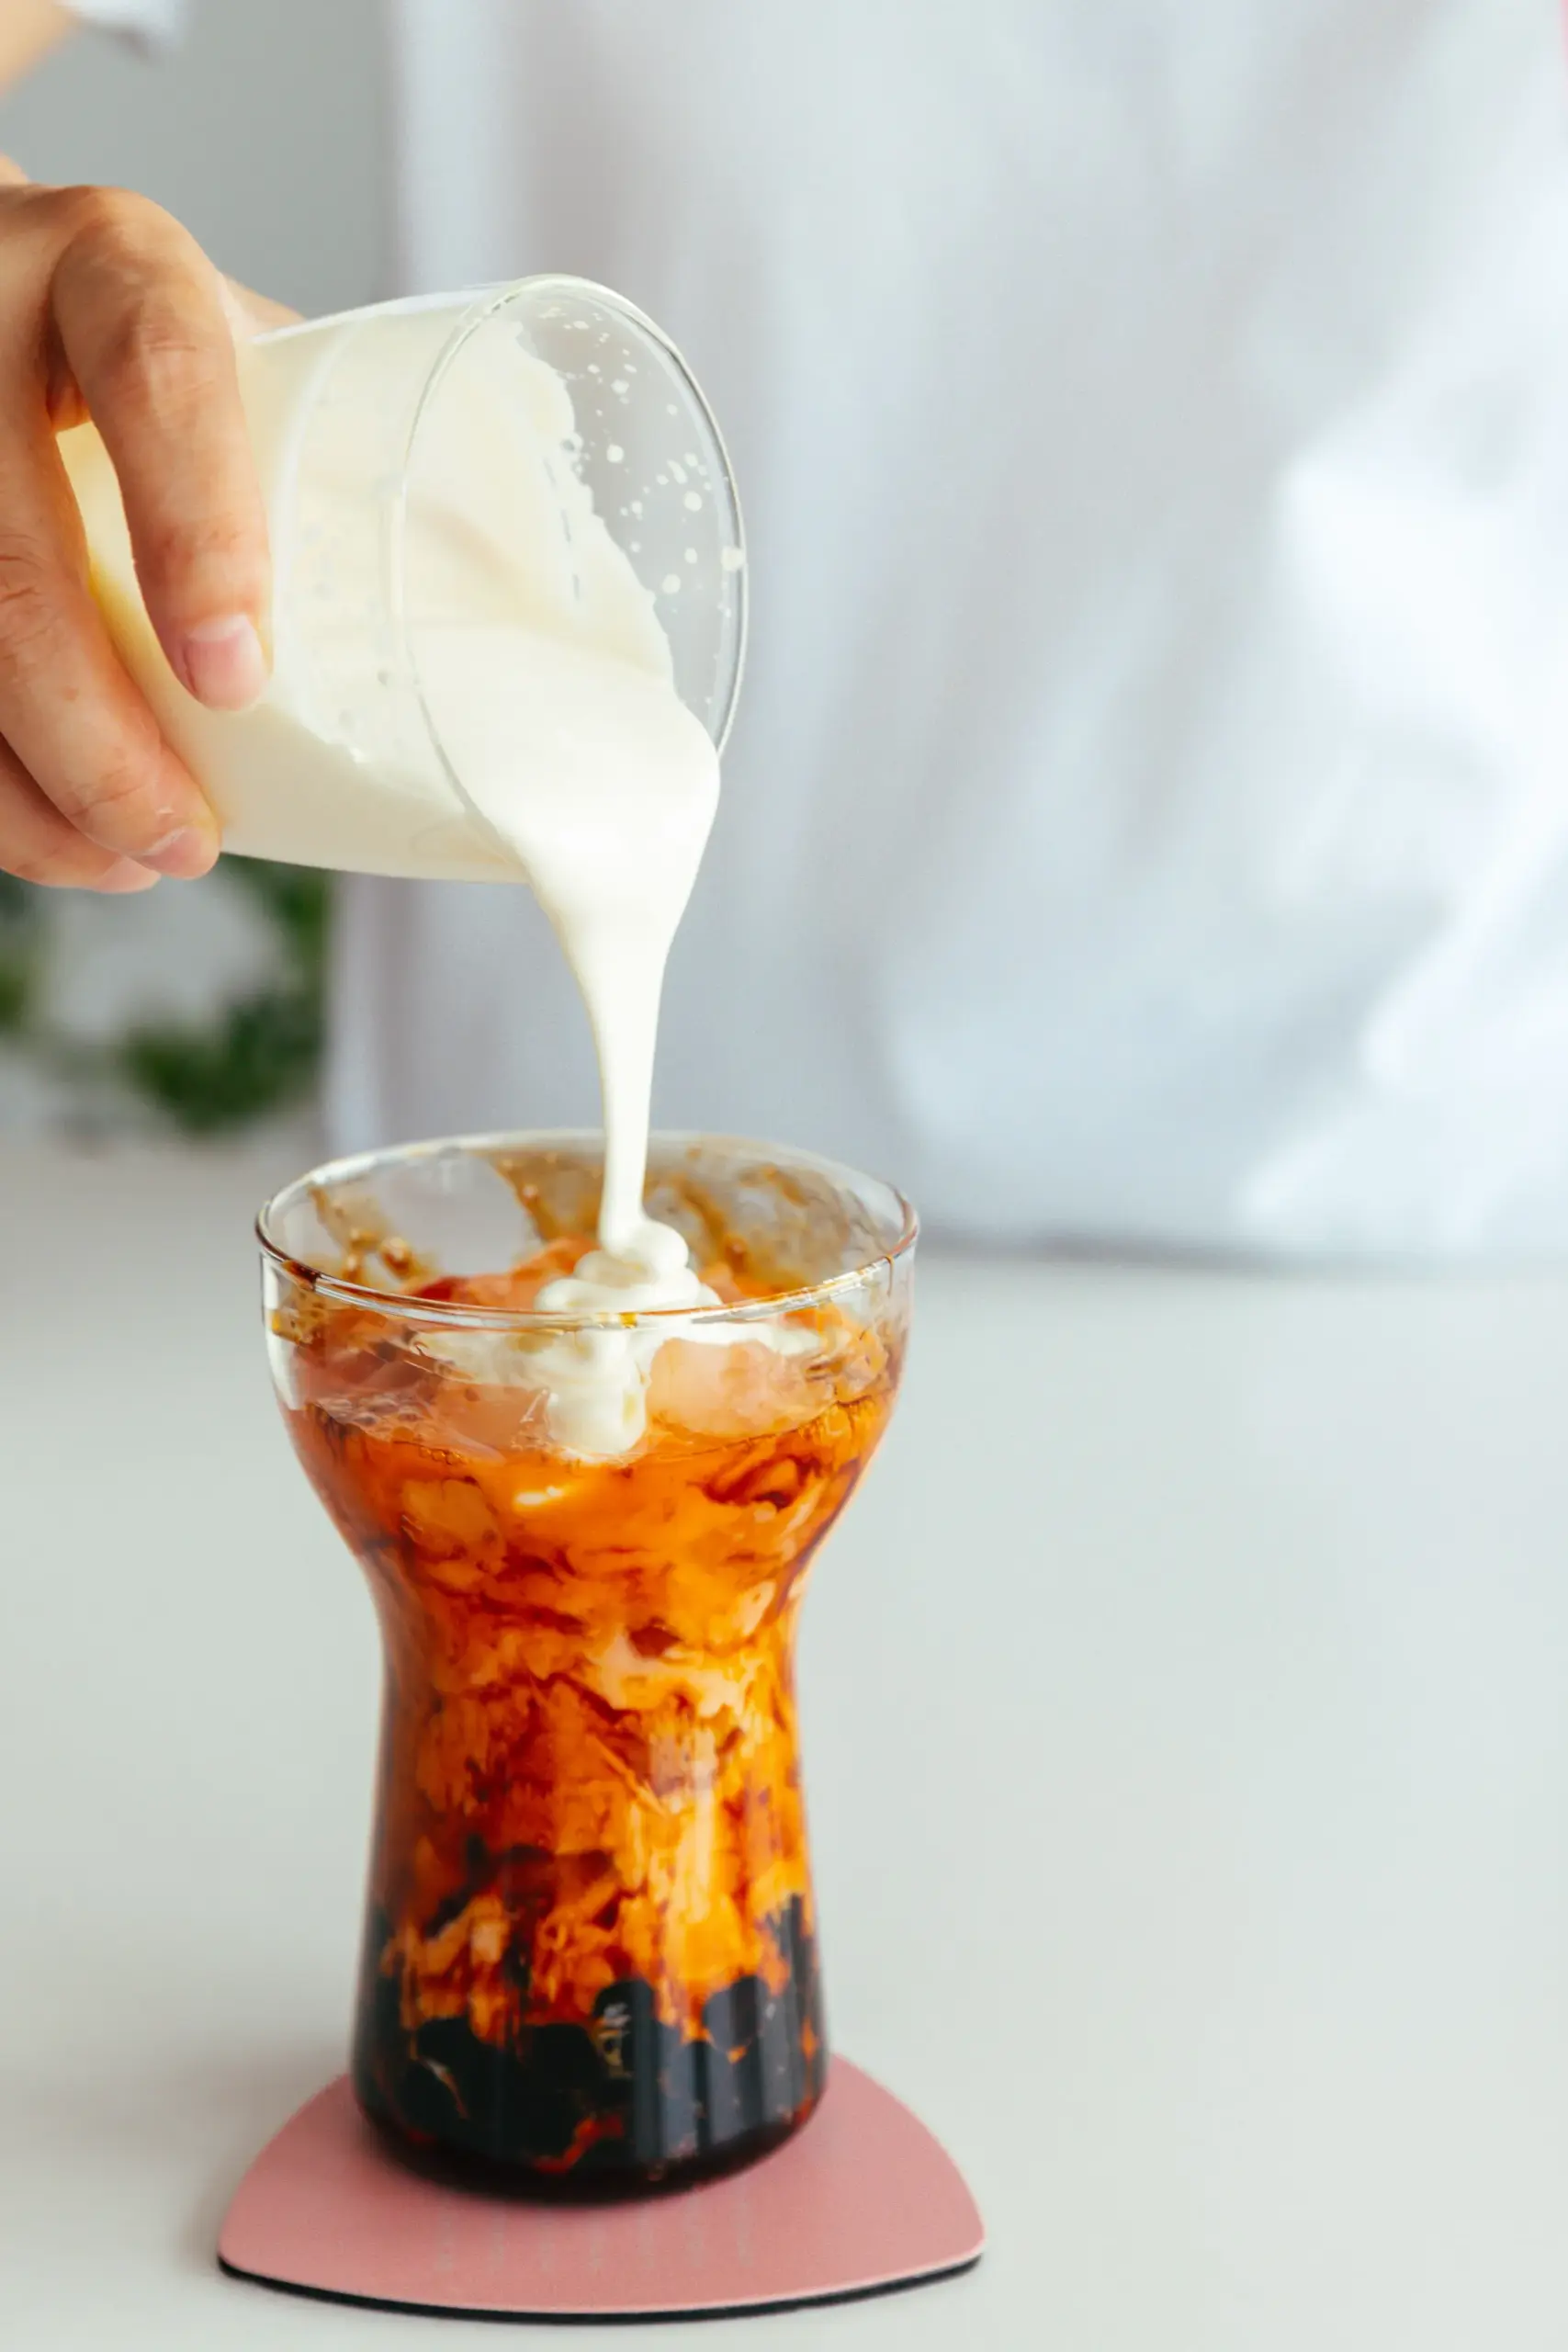 how to make cheese foam for bubble tea